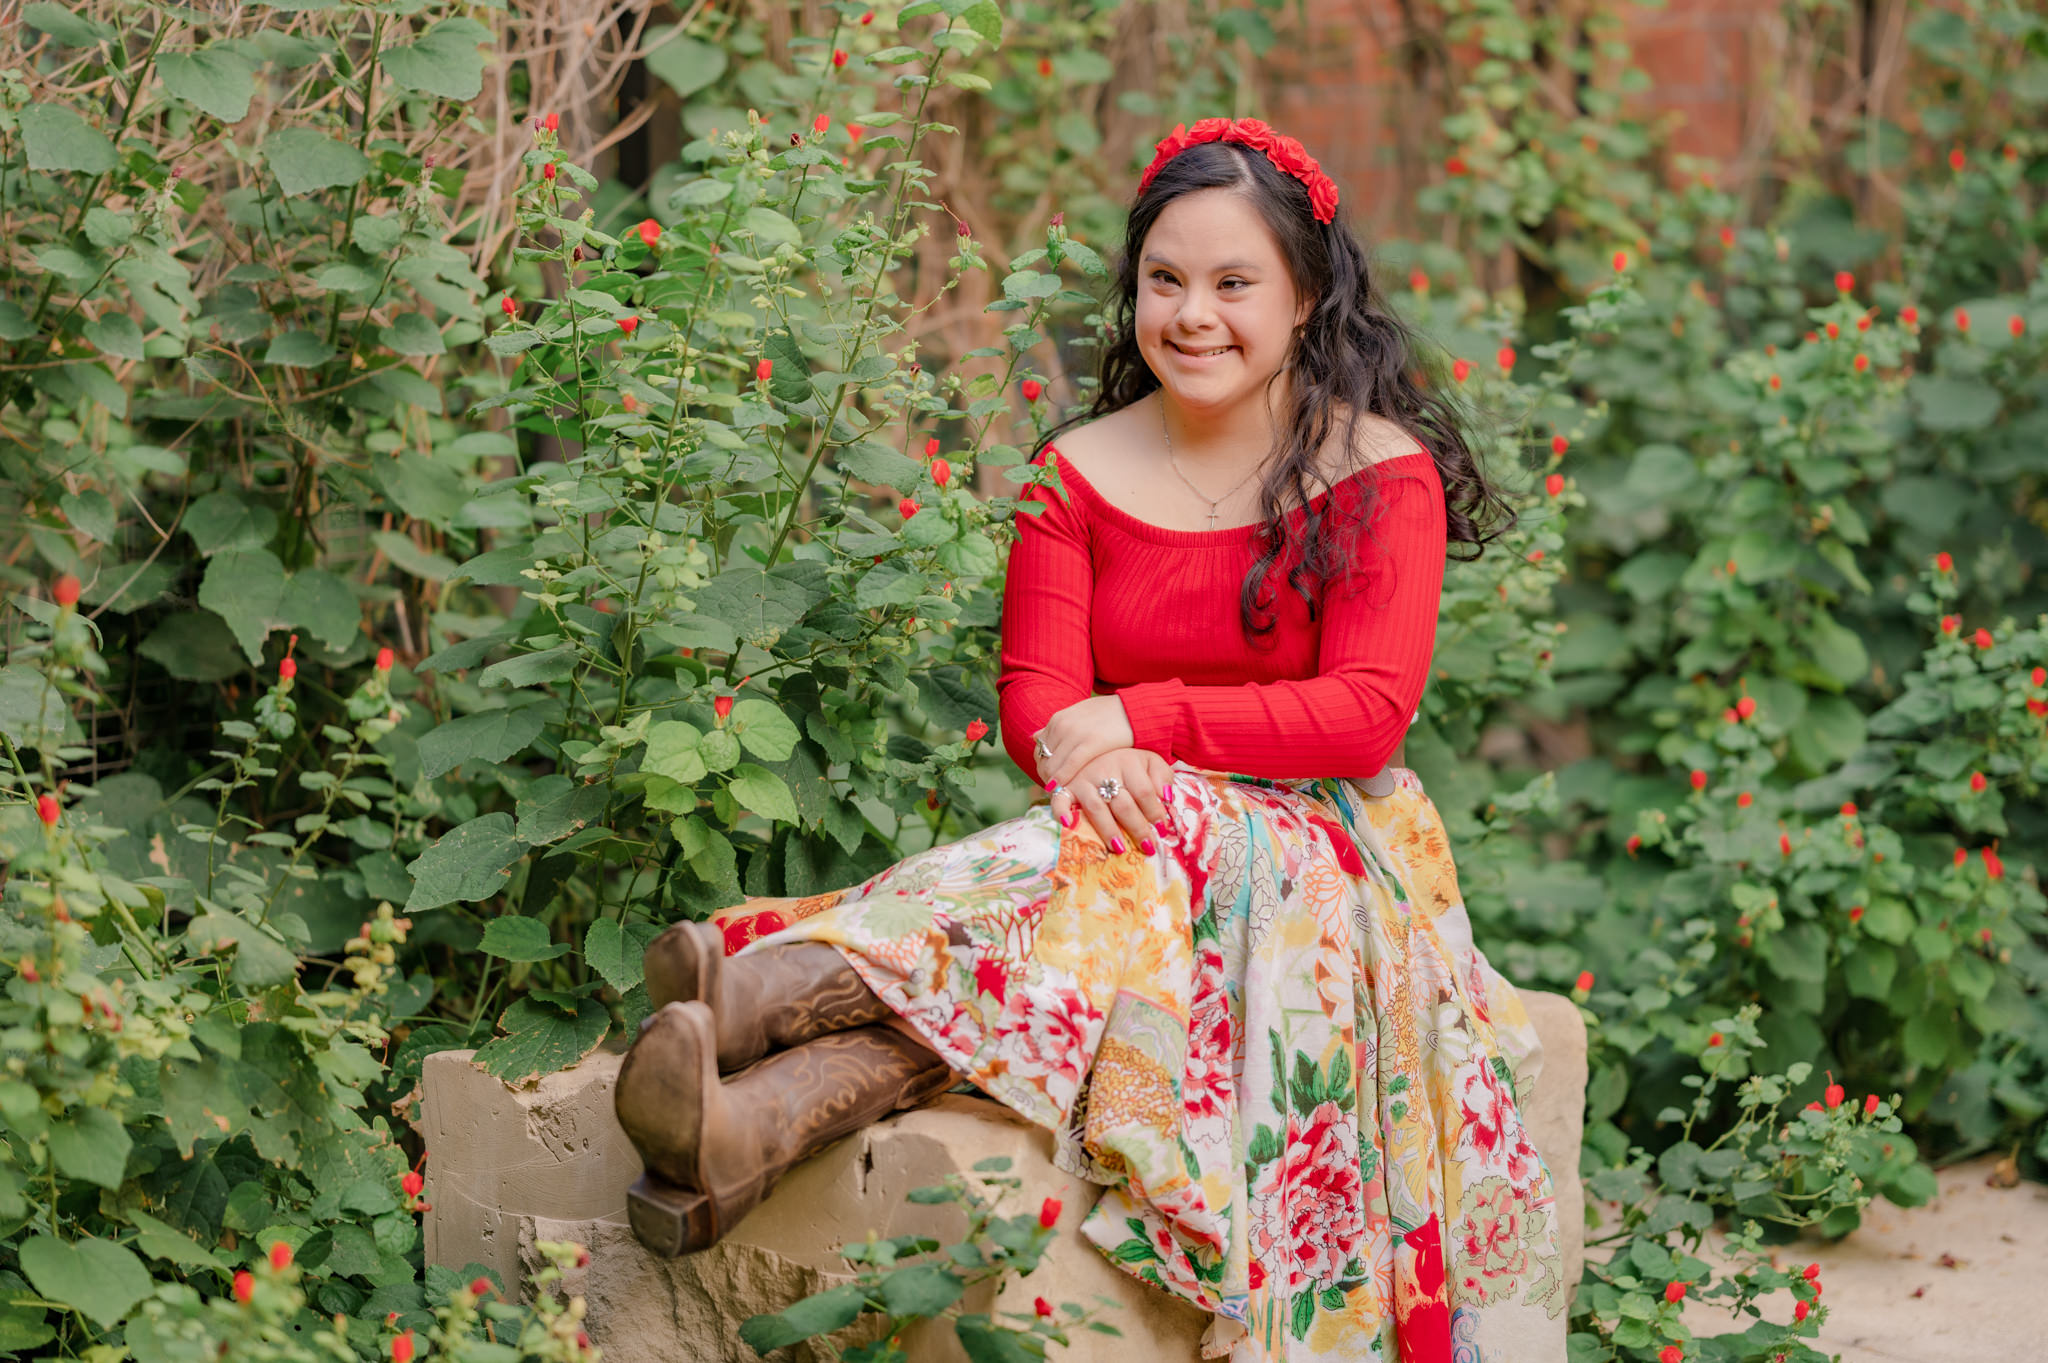 A young woman with Down syndrome looks stunning in a floral skirt and a bright red top amongst a wall of red flowers. Image by San Antonio inclusive photographer Cassey Golden.